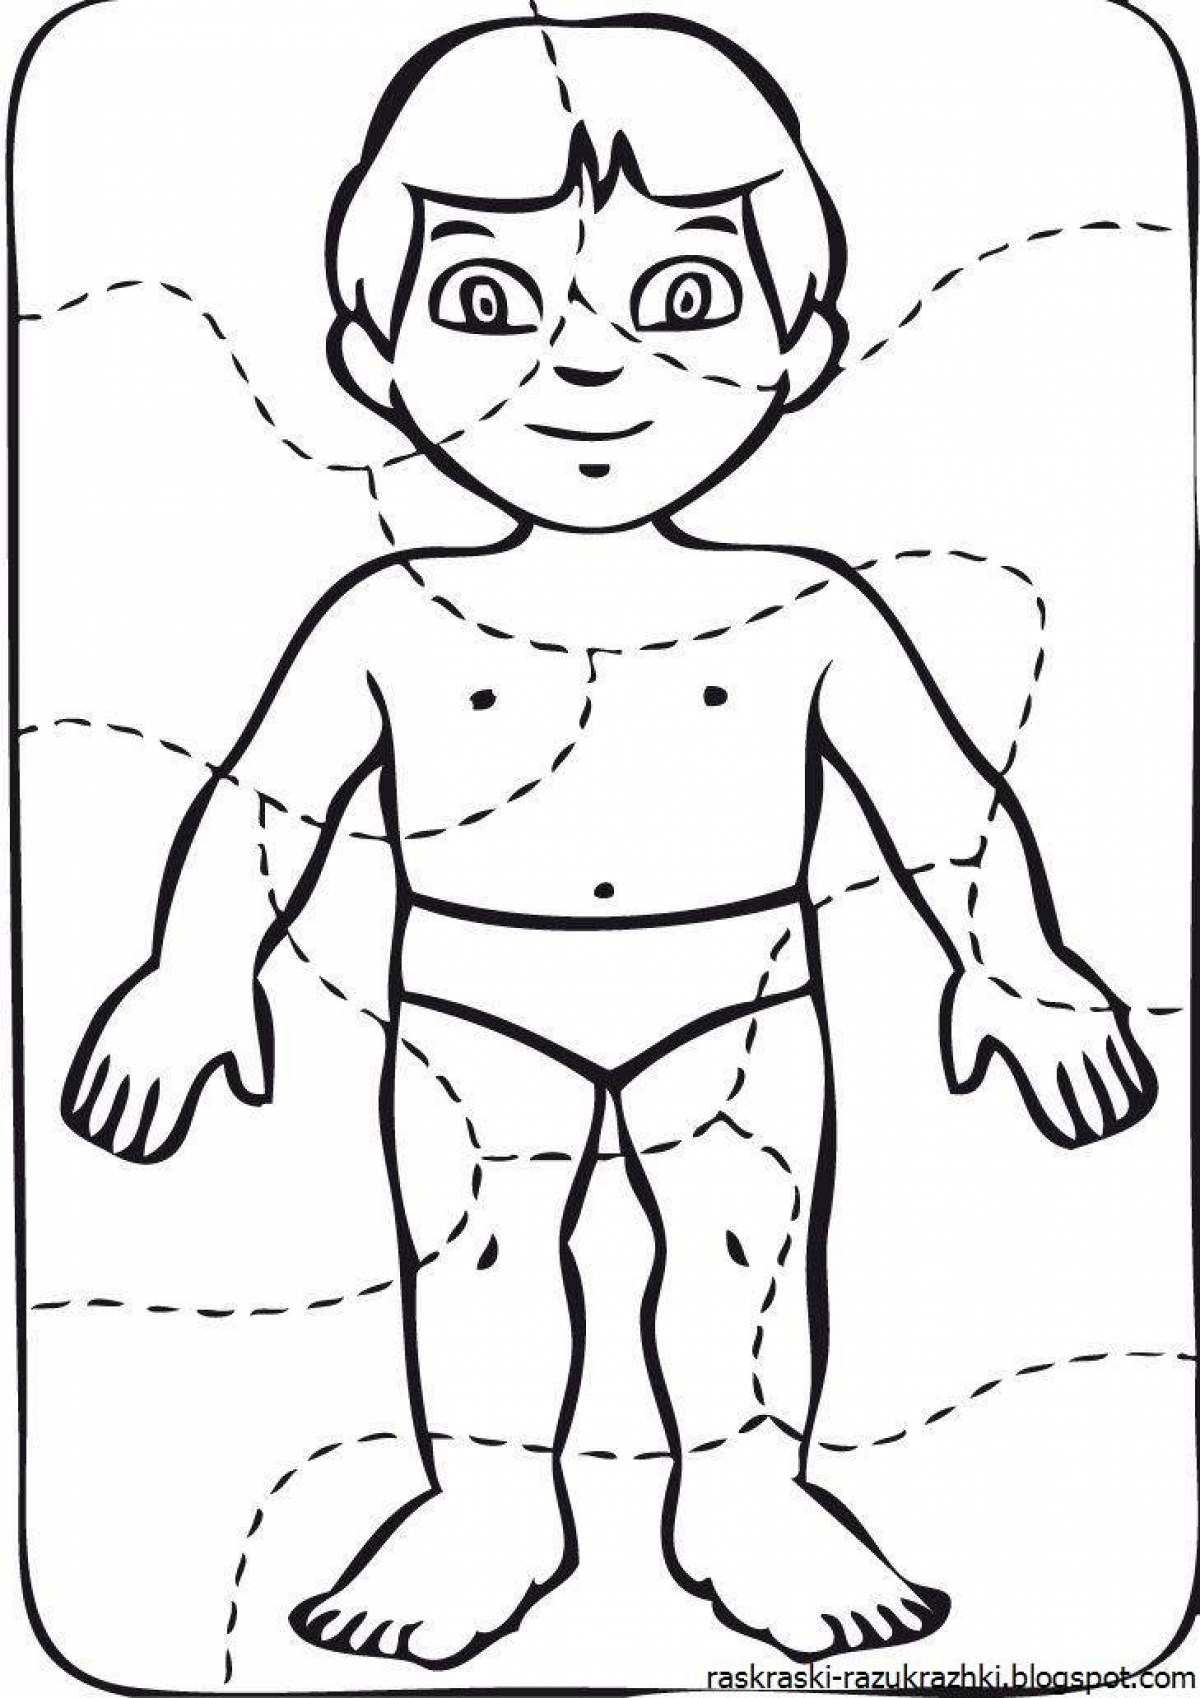 Fun human body coloring page for babies